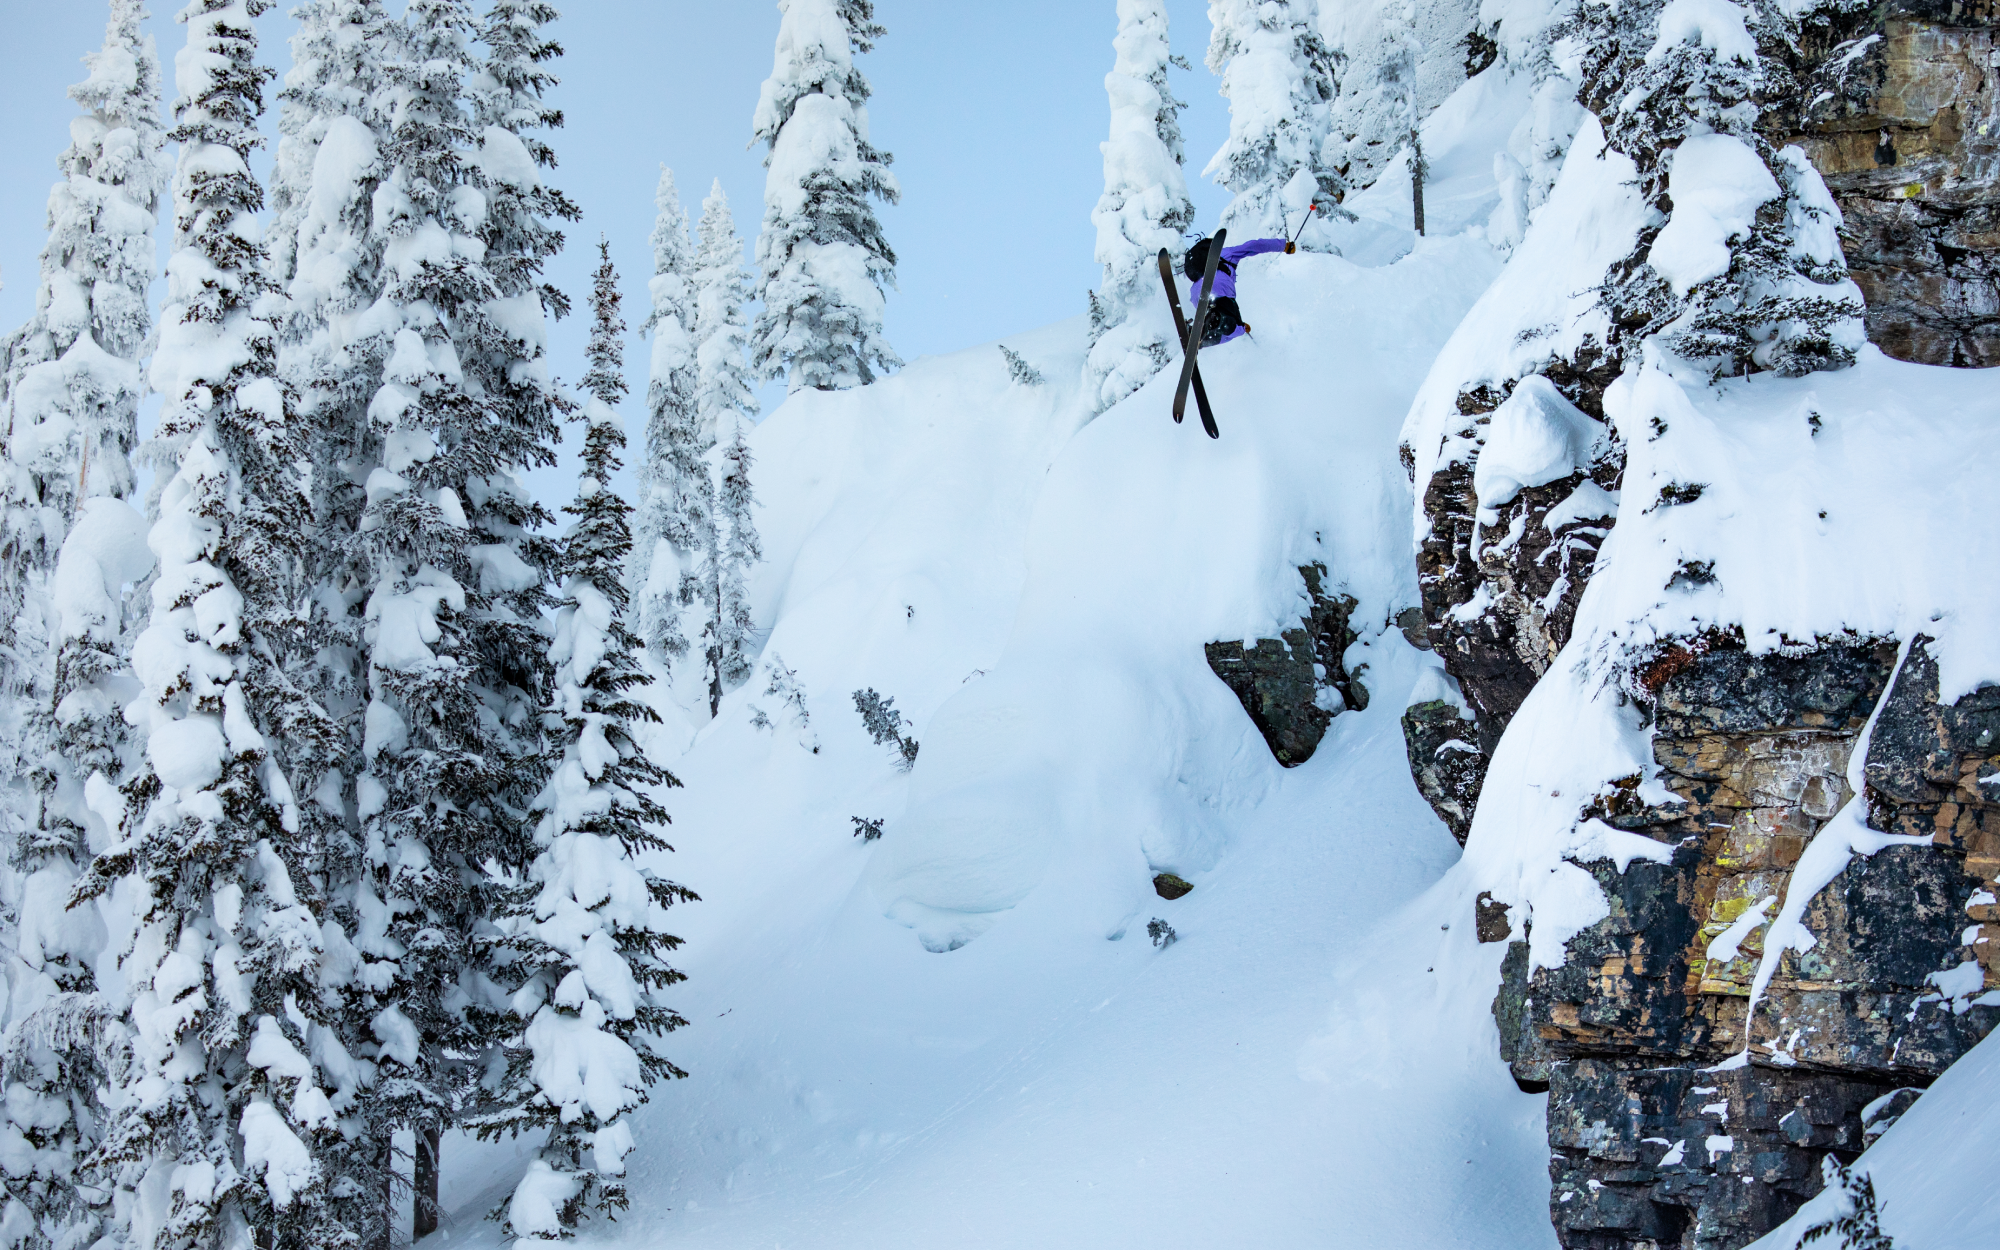 Hank Stowers styles a 3 in the Canadian backcountry.